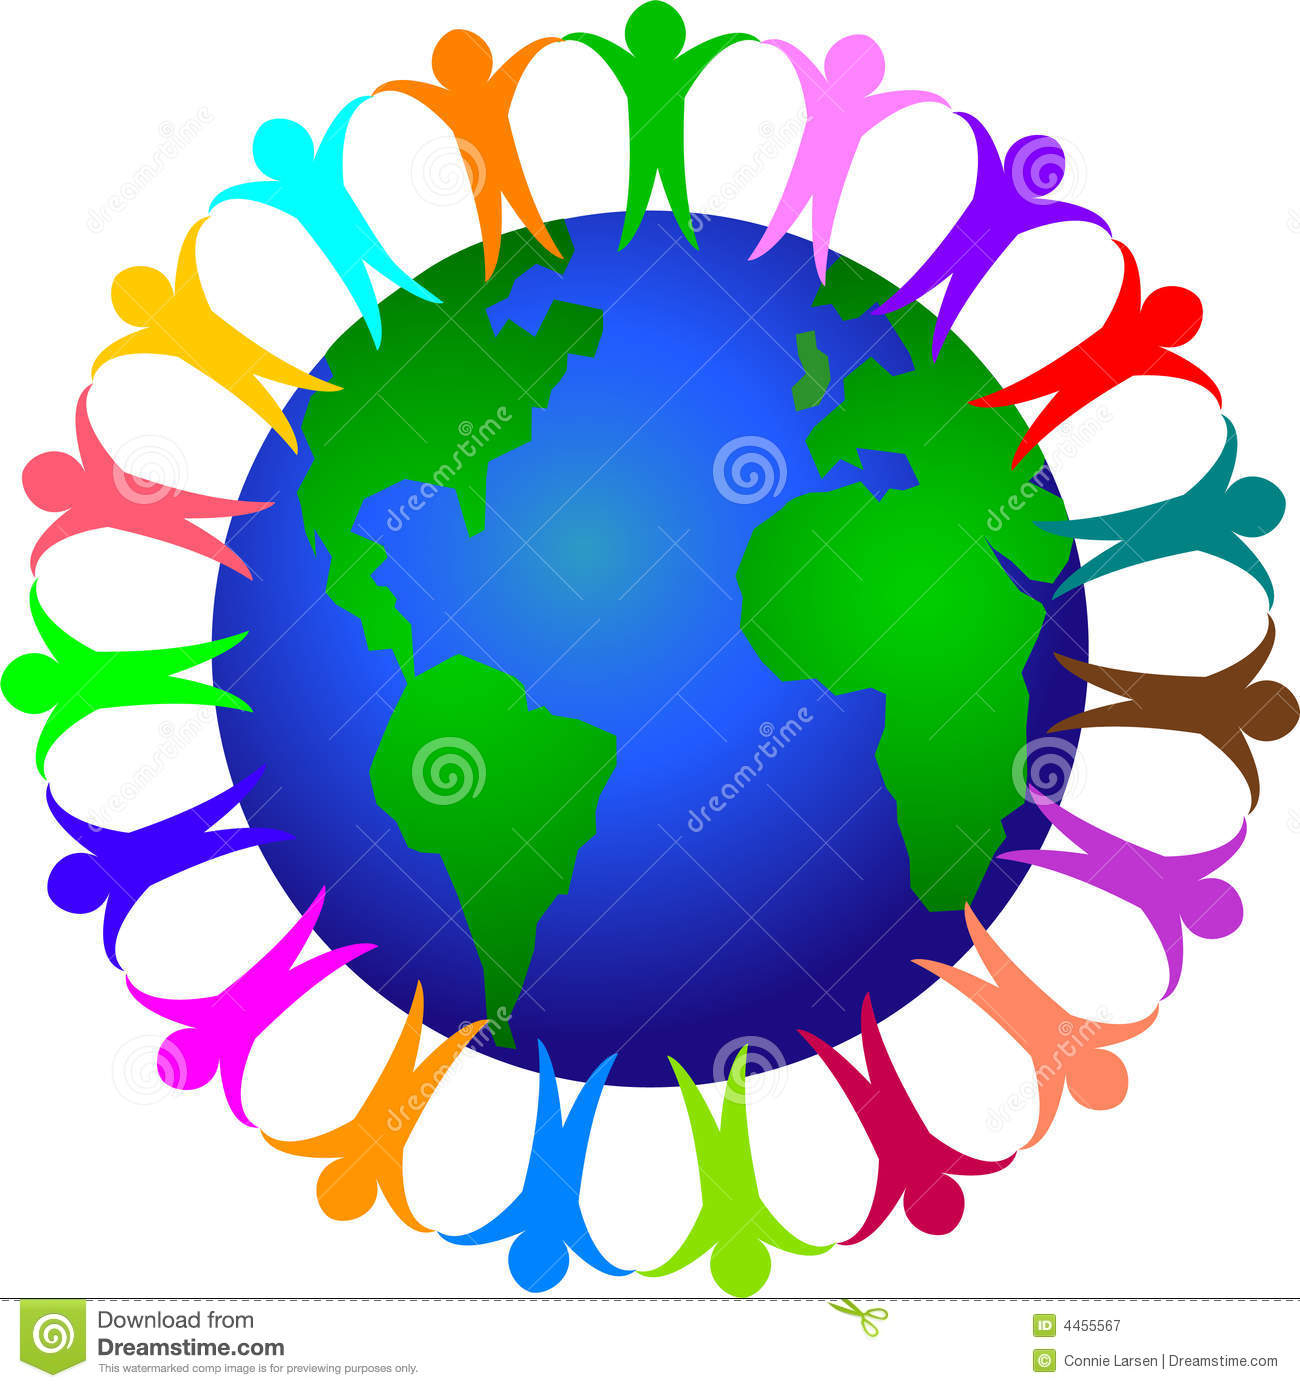 Illustration Of Diverse People Hand In Hand Surrounding The World In A